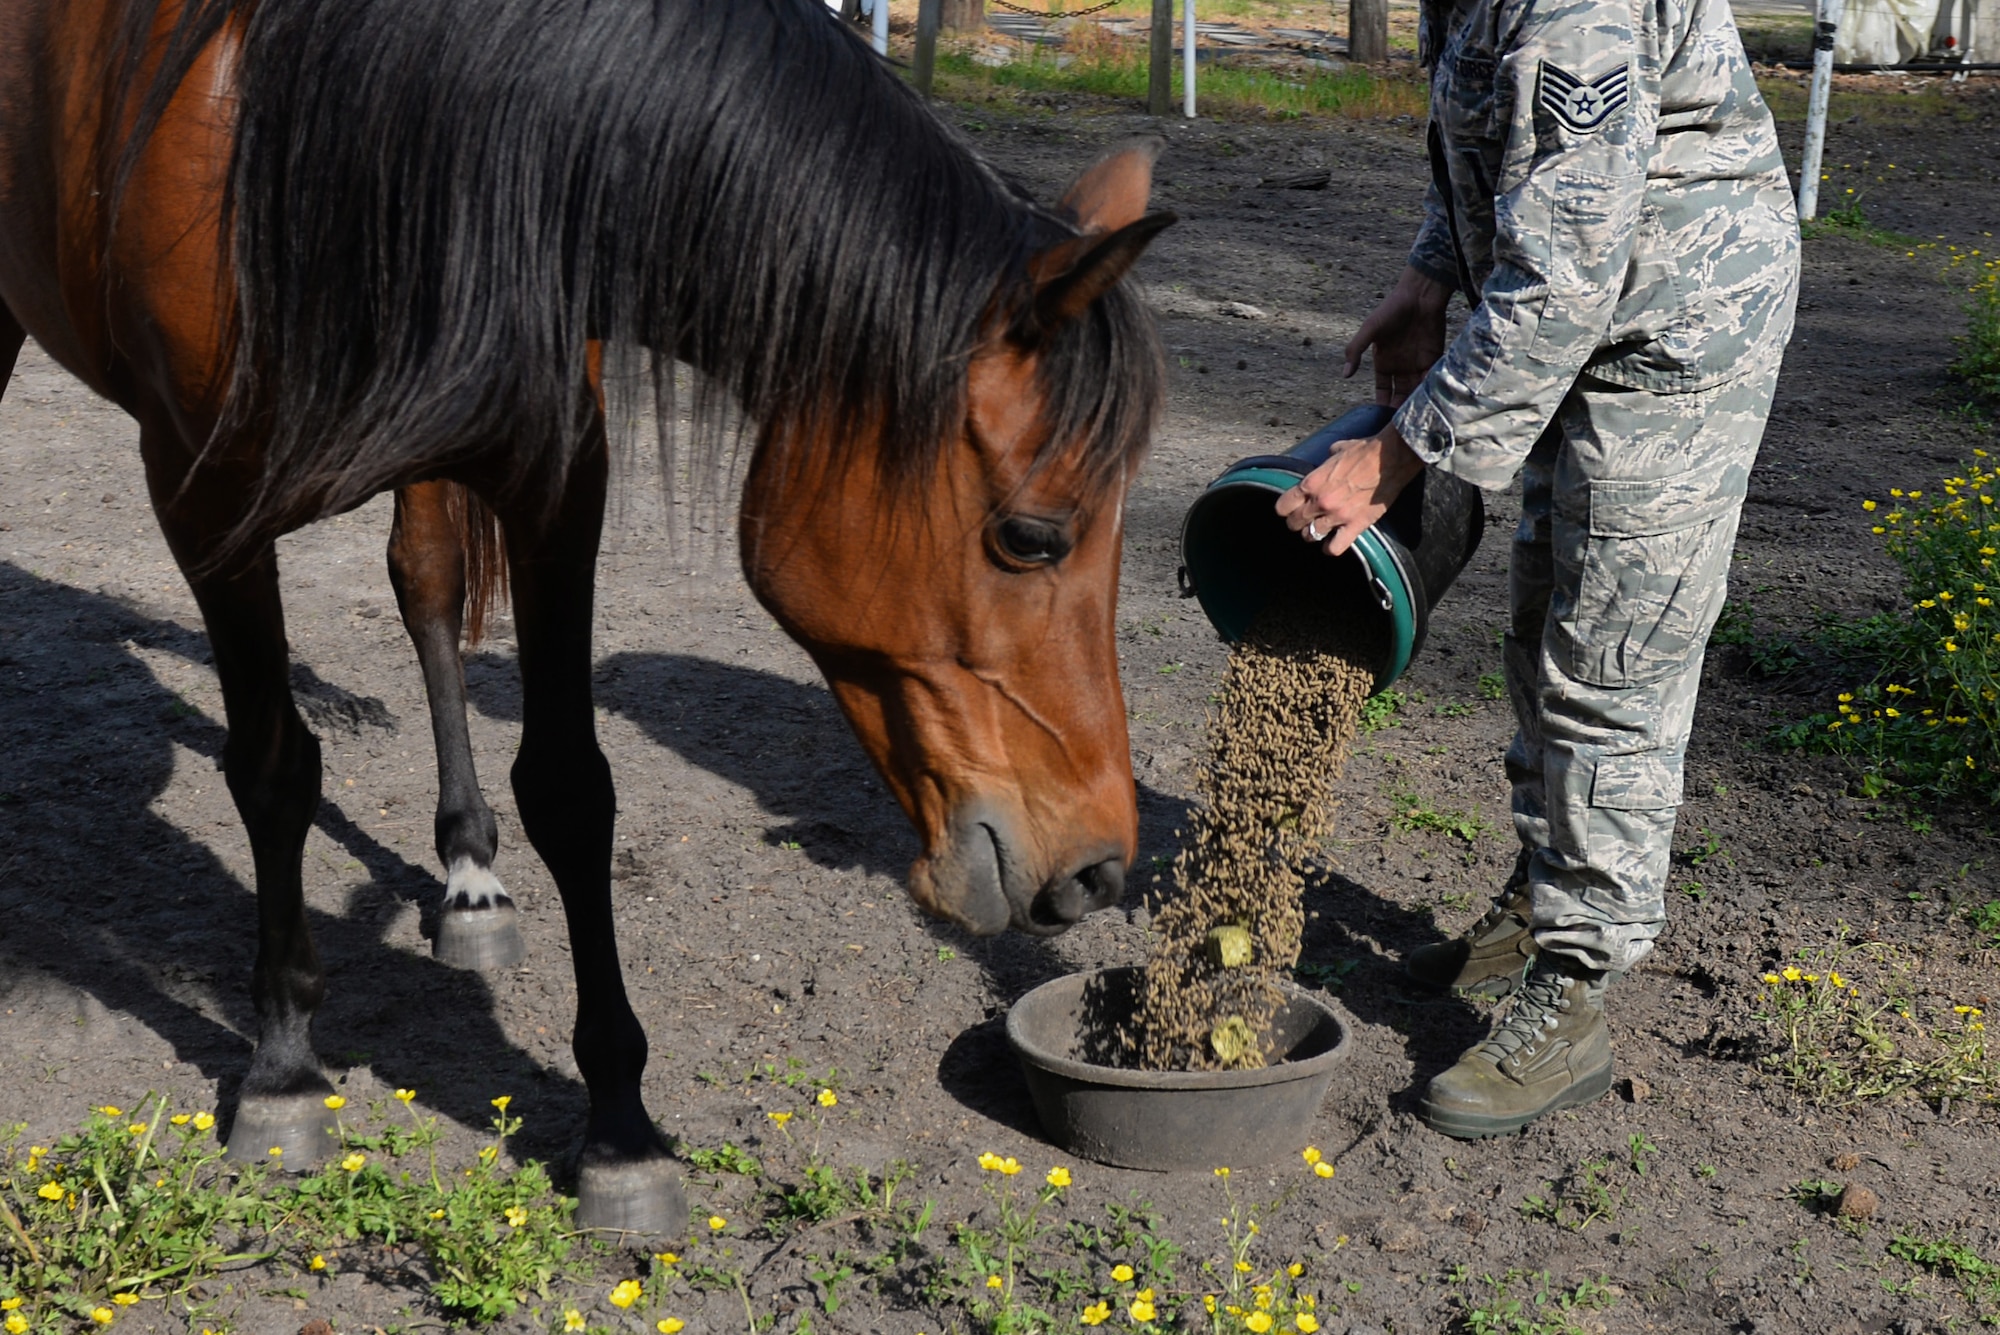 Staff Sgt. Katrina Rubisch, 4th Equipment Maintenance Squadron aircraft armament systems technician, feeds her horses, March 25, 2016, in Goldsboro, North Carolina. Rubisch owns two horses whom she interacts with and feeds twice a day. (U.S. Air Force photo by Airman 1st Class Ashley Williamson/Released)